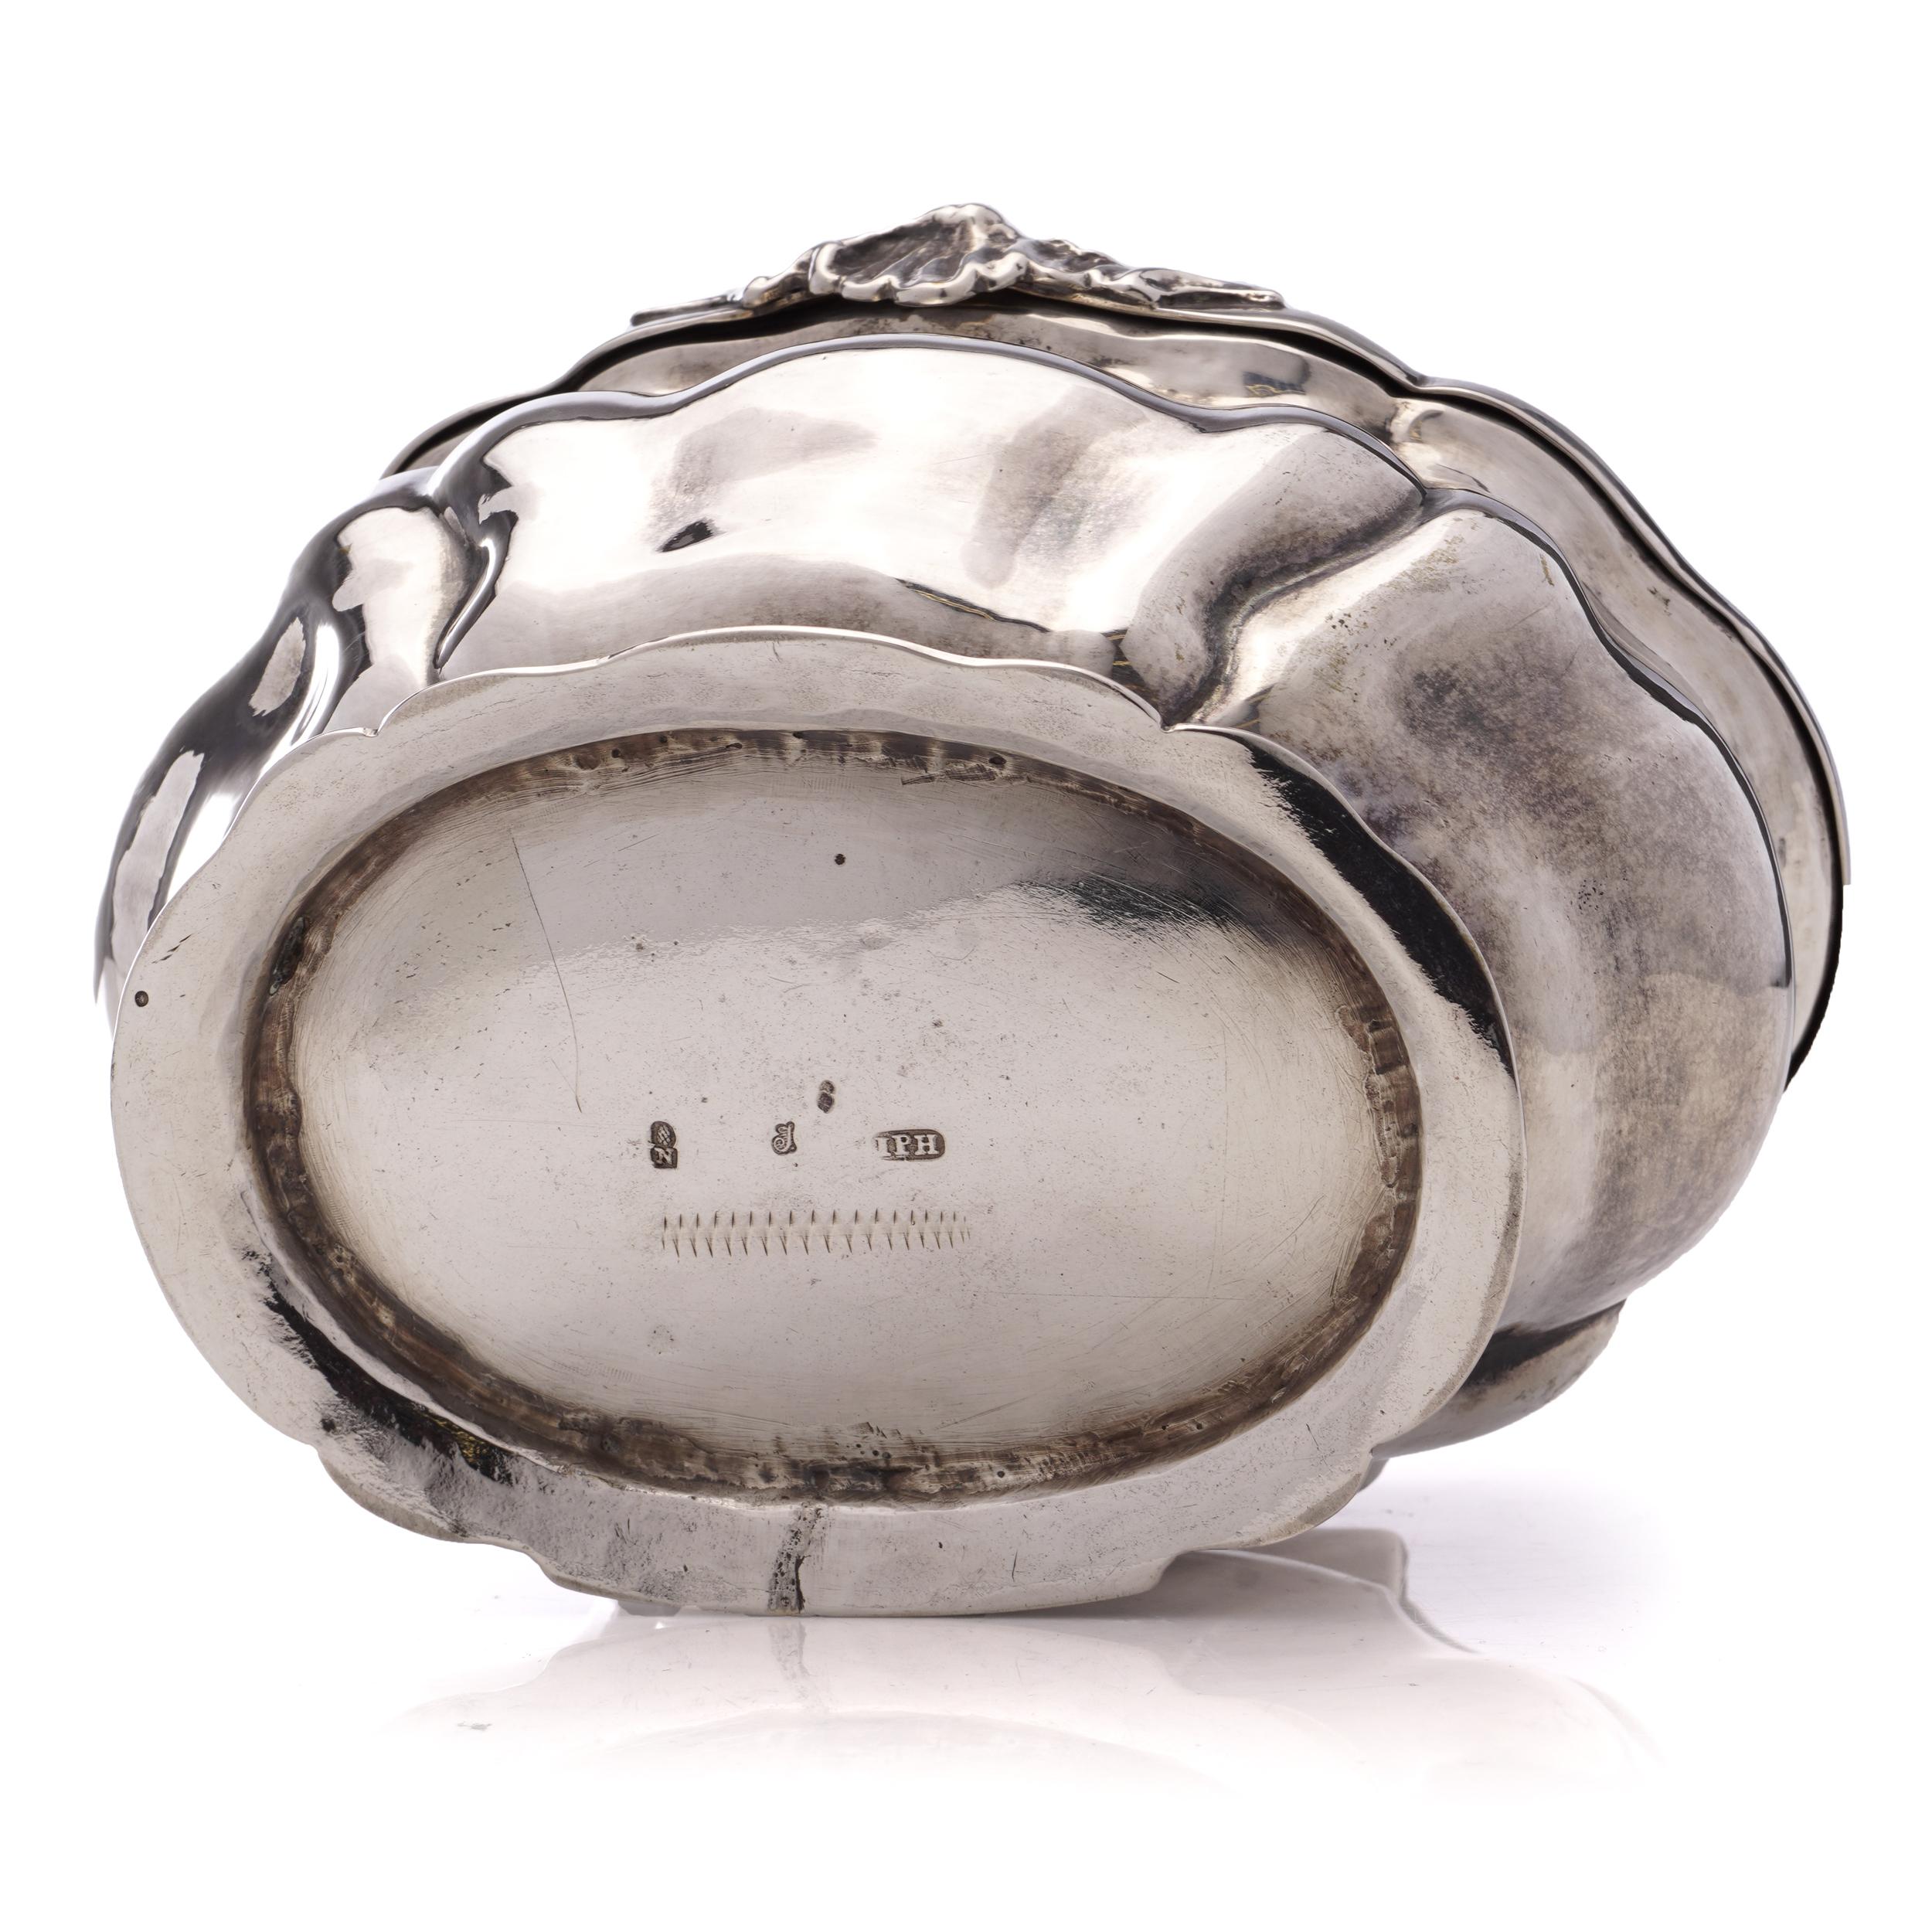 Antique 19th century 800. German silver small oval Tea Caddy with Hanau marks For Sale 3